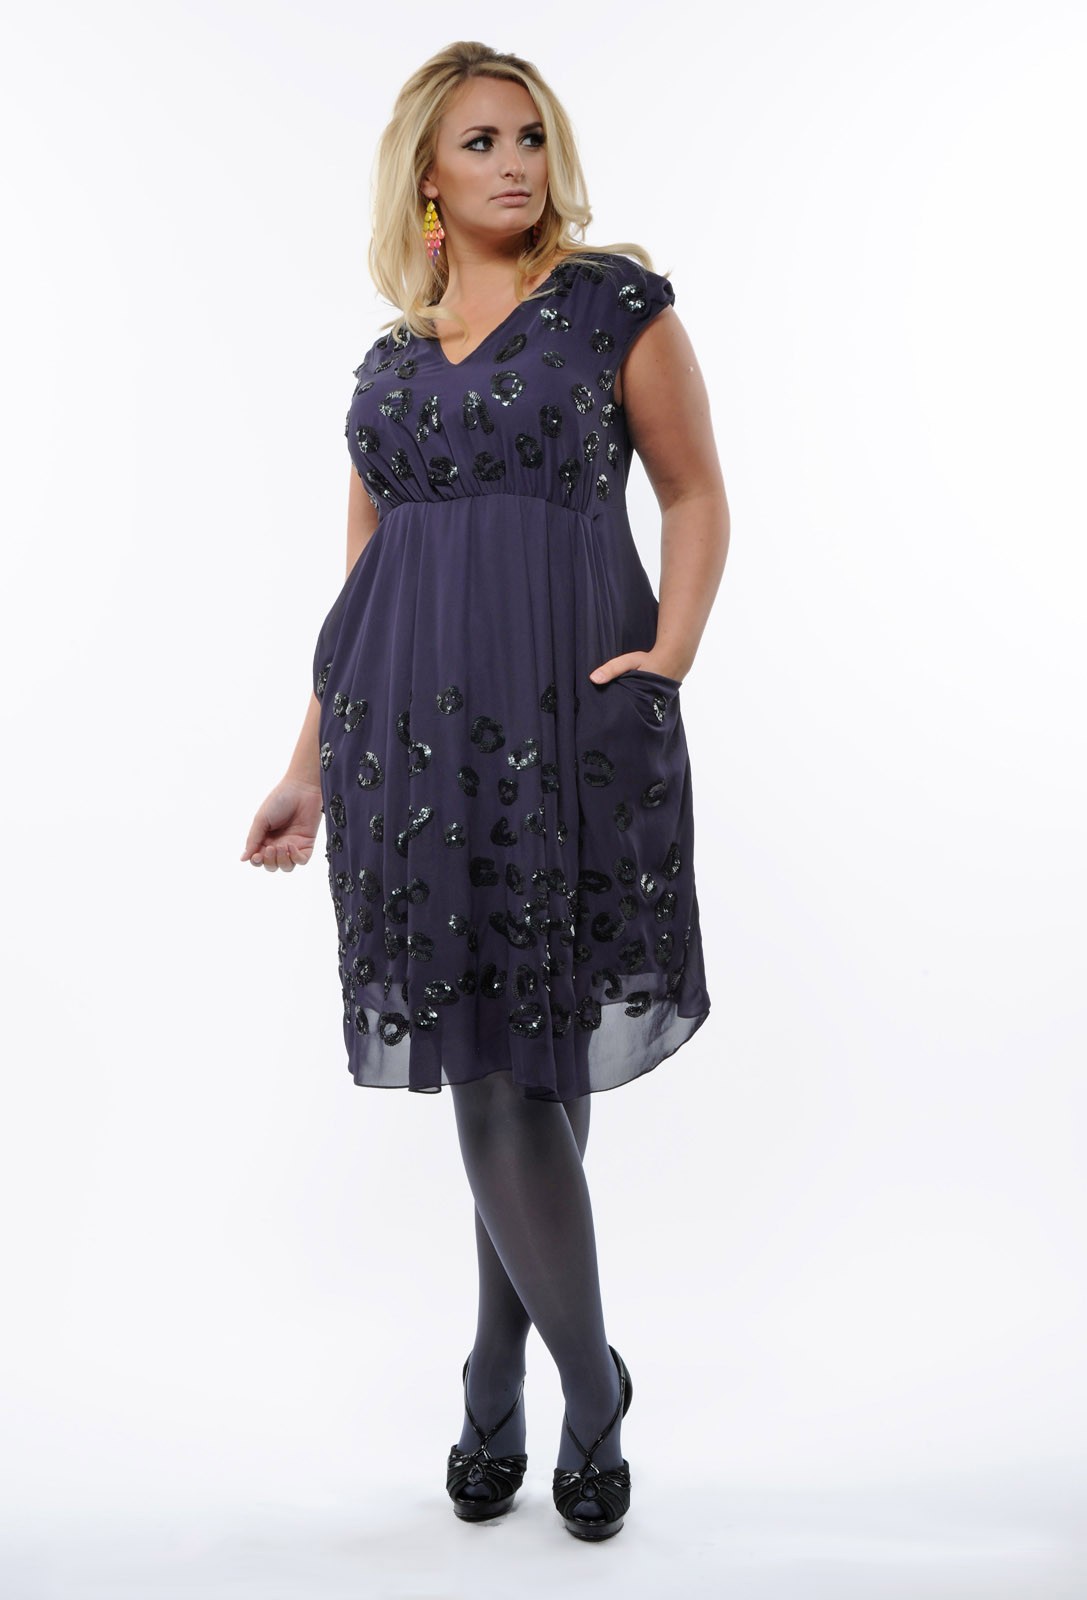 new-years-eve-plus-size-dresses